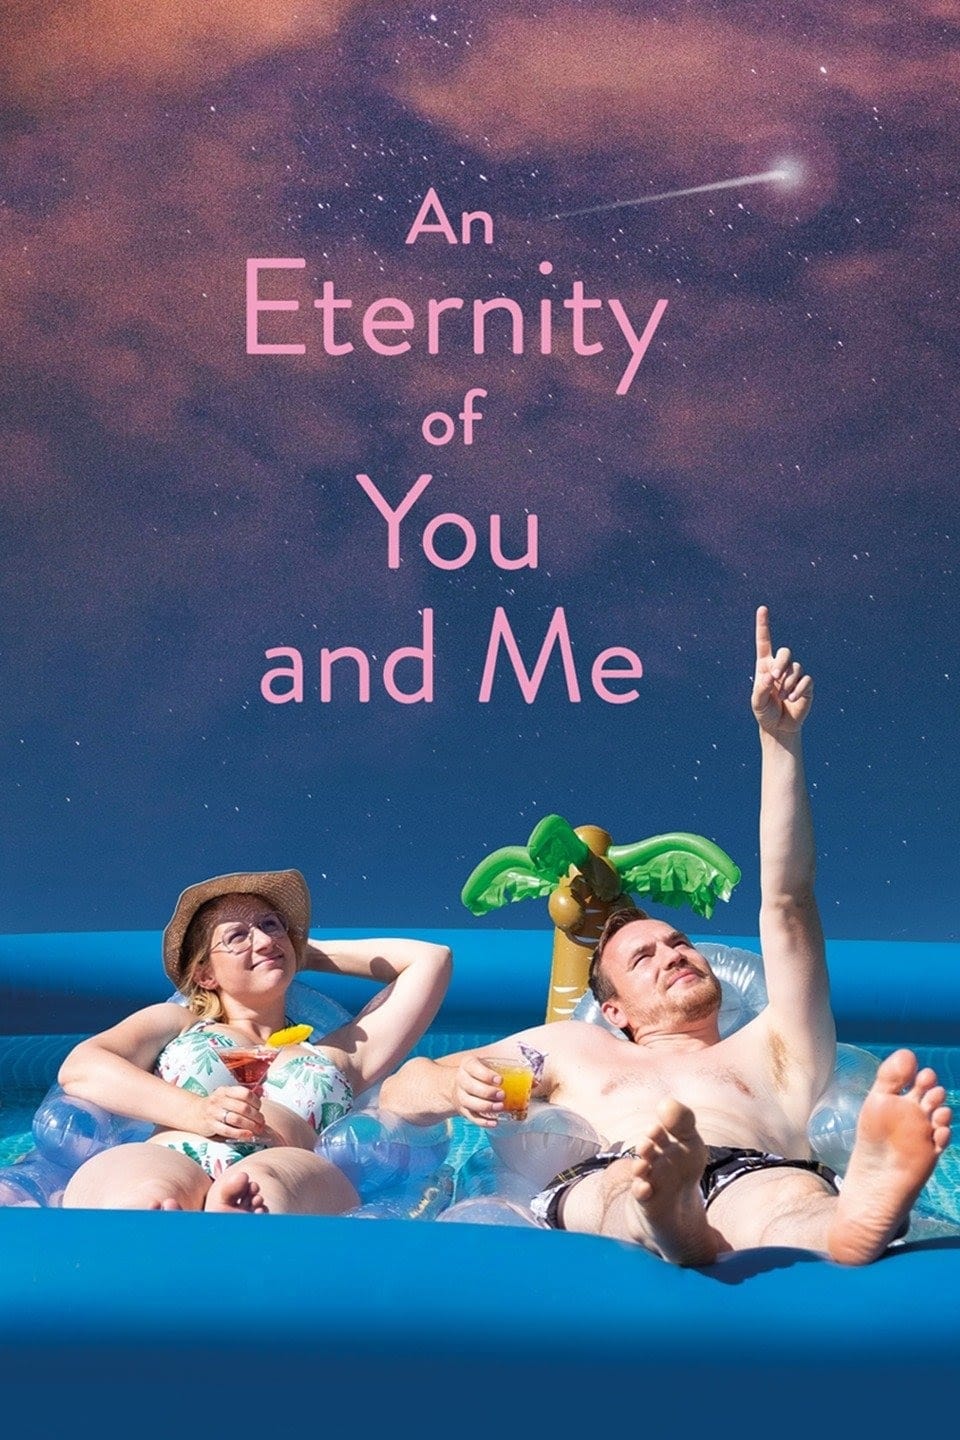 An Eternity of You and Me